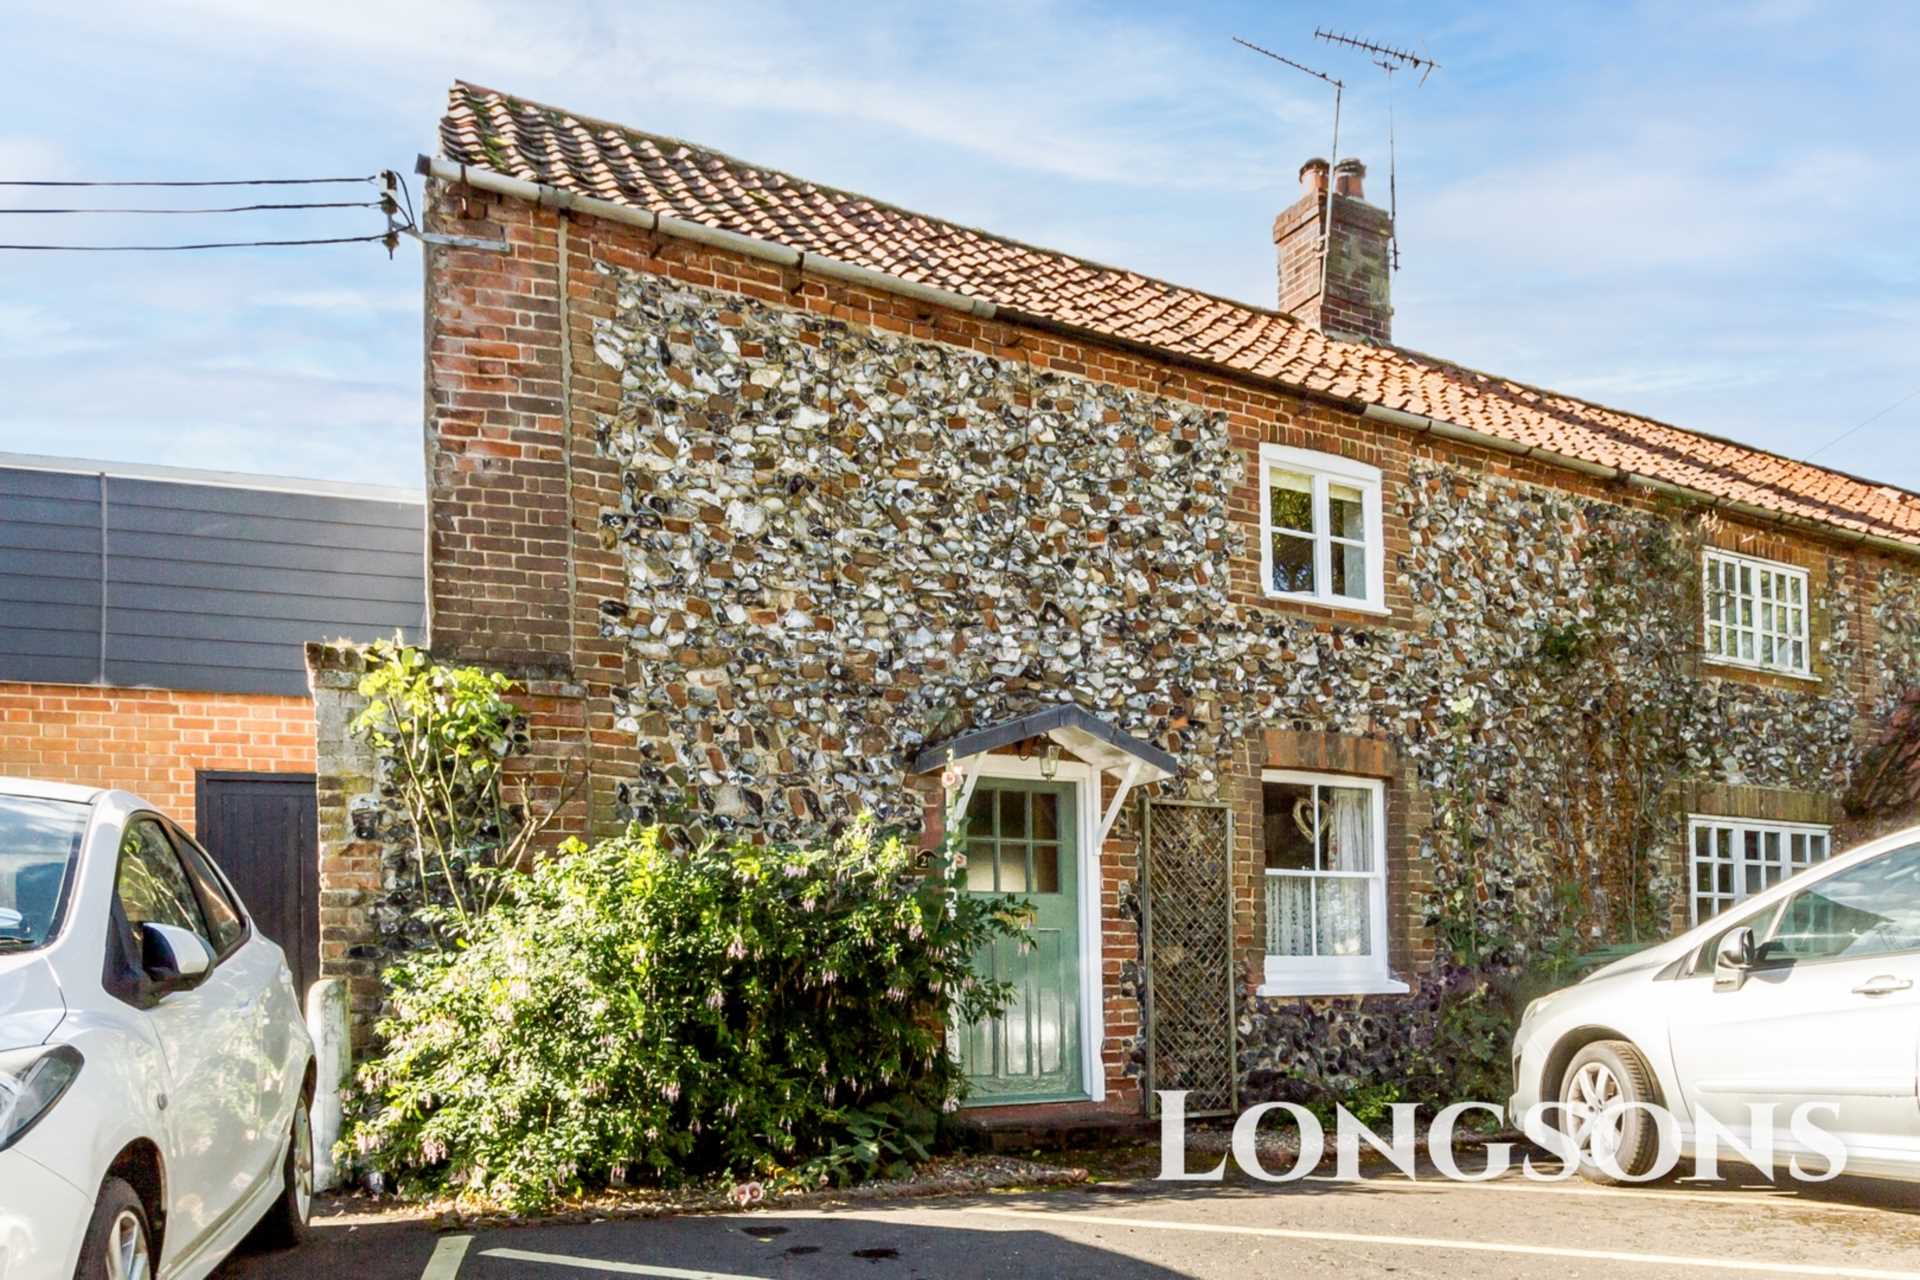 3 bed End Terraced House for rent in Swaffham. From Longsons - Swaffham